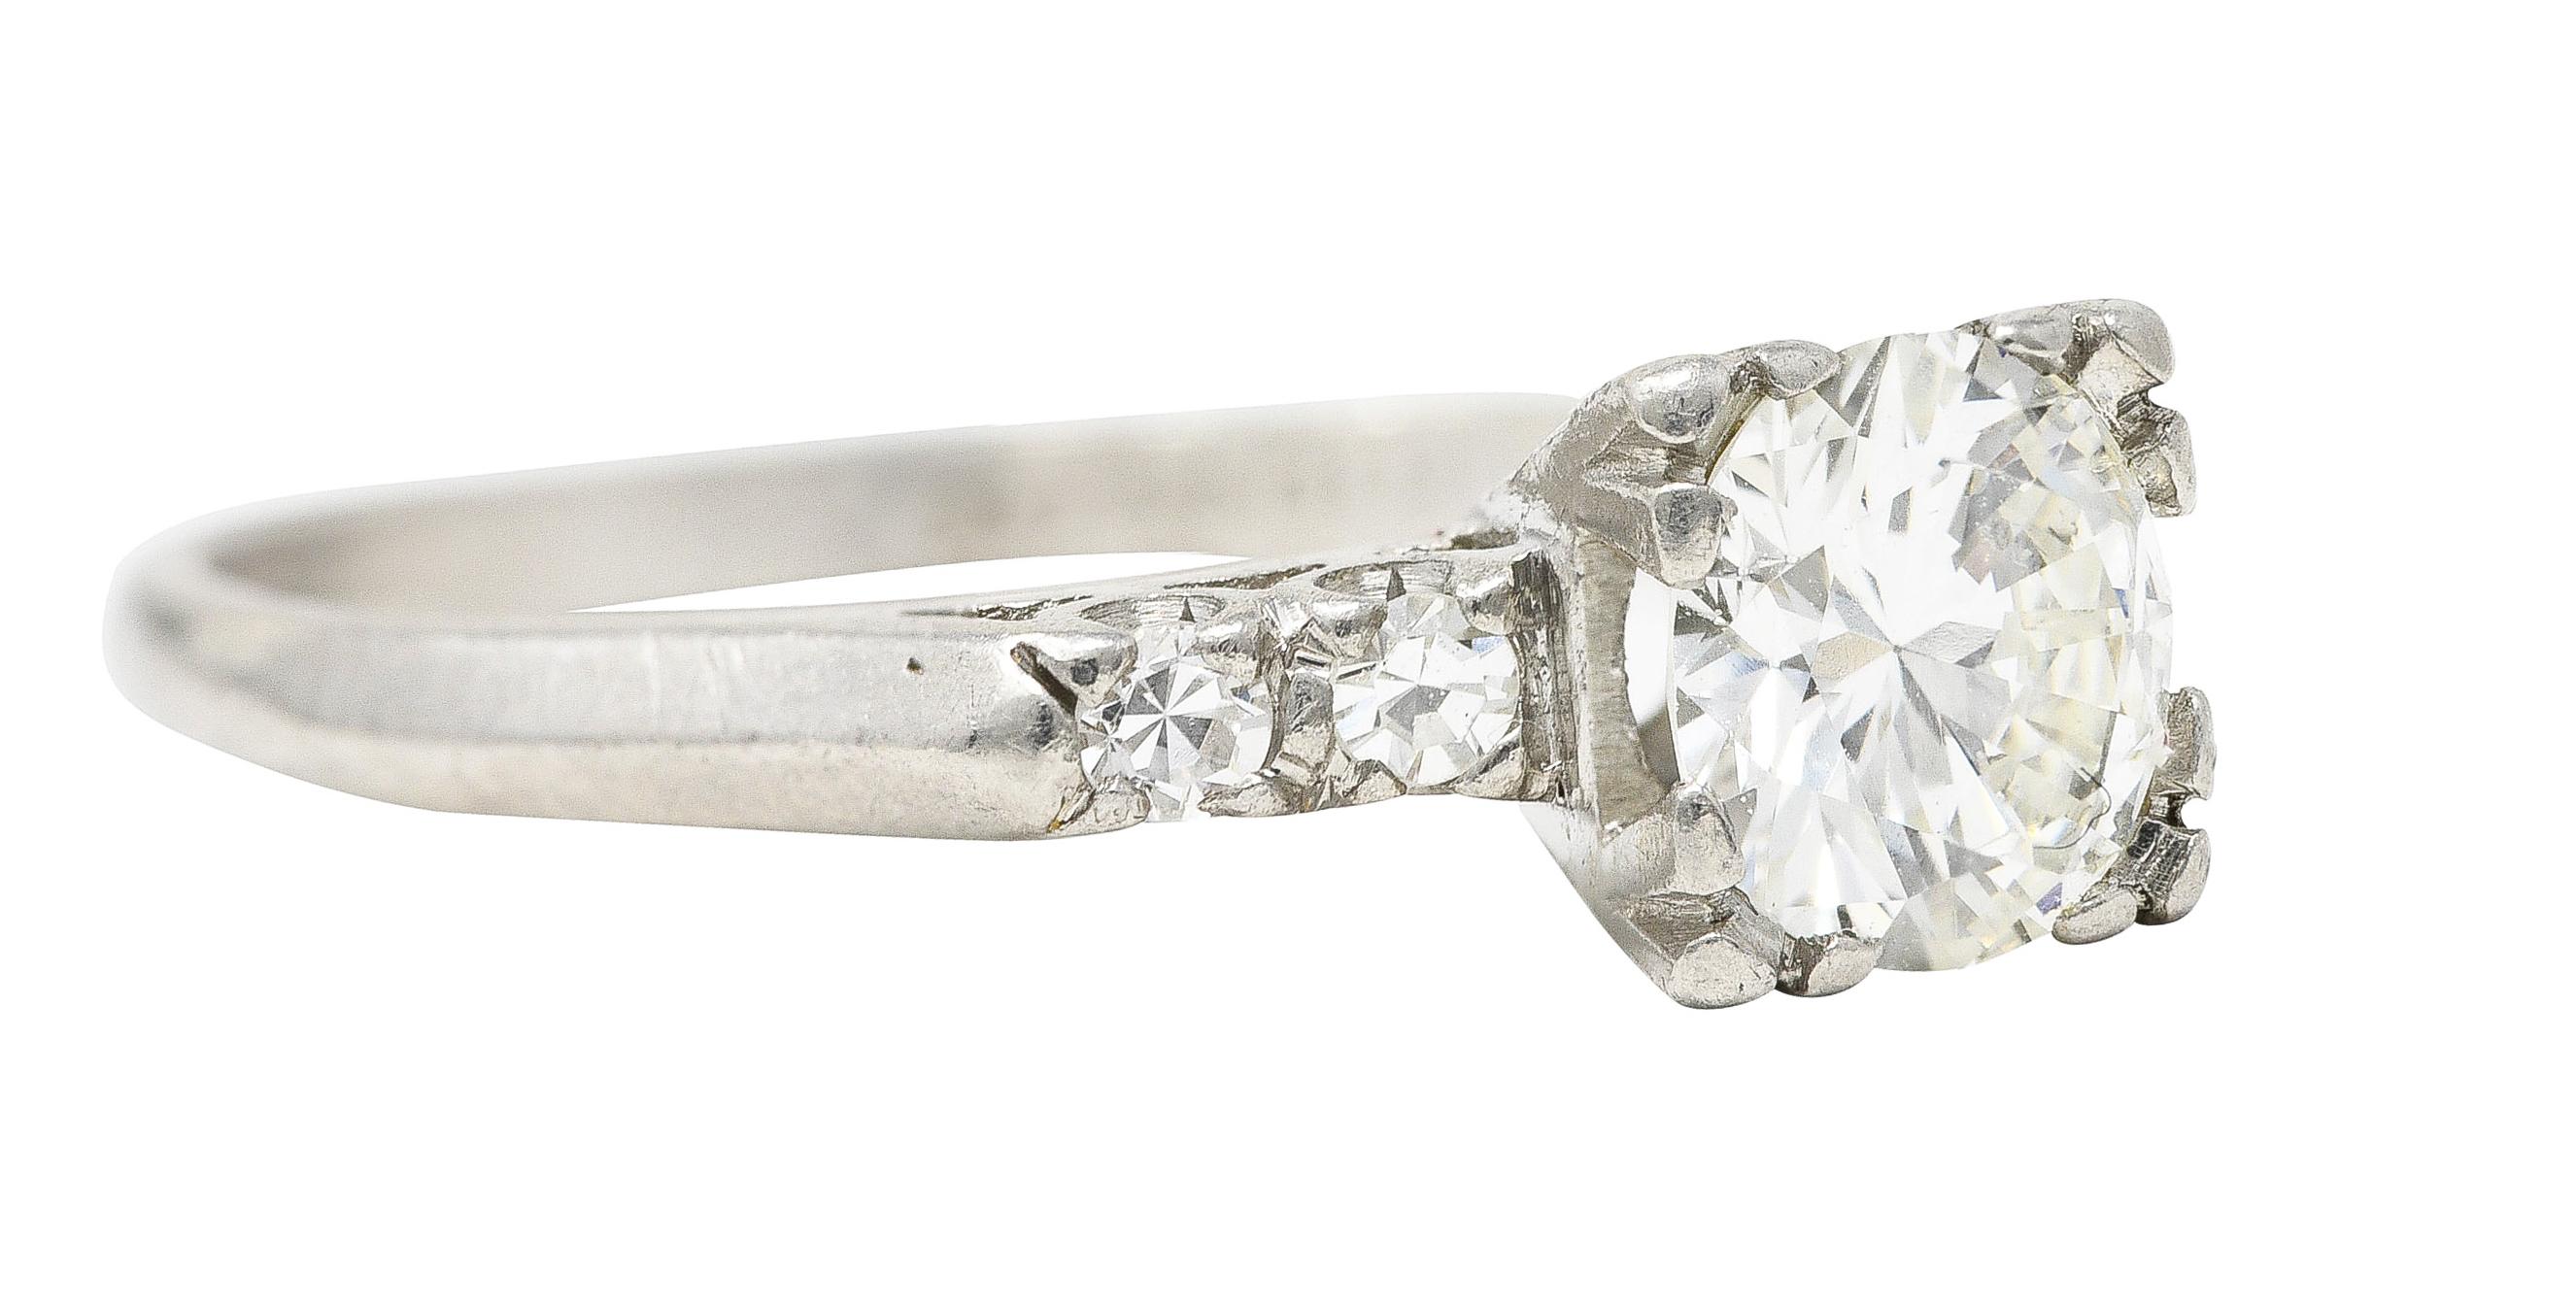 Centering a transitional cut diamond weighing approximately 0.80 carat total - H color with VS2 clarity. Set with tri-split prongs in a pierced square form basket and flanked by single cut diamonds. Prong set and weighing approximately 0.16 carat